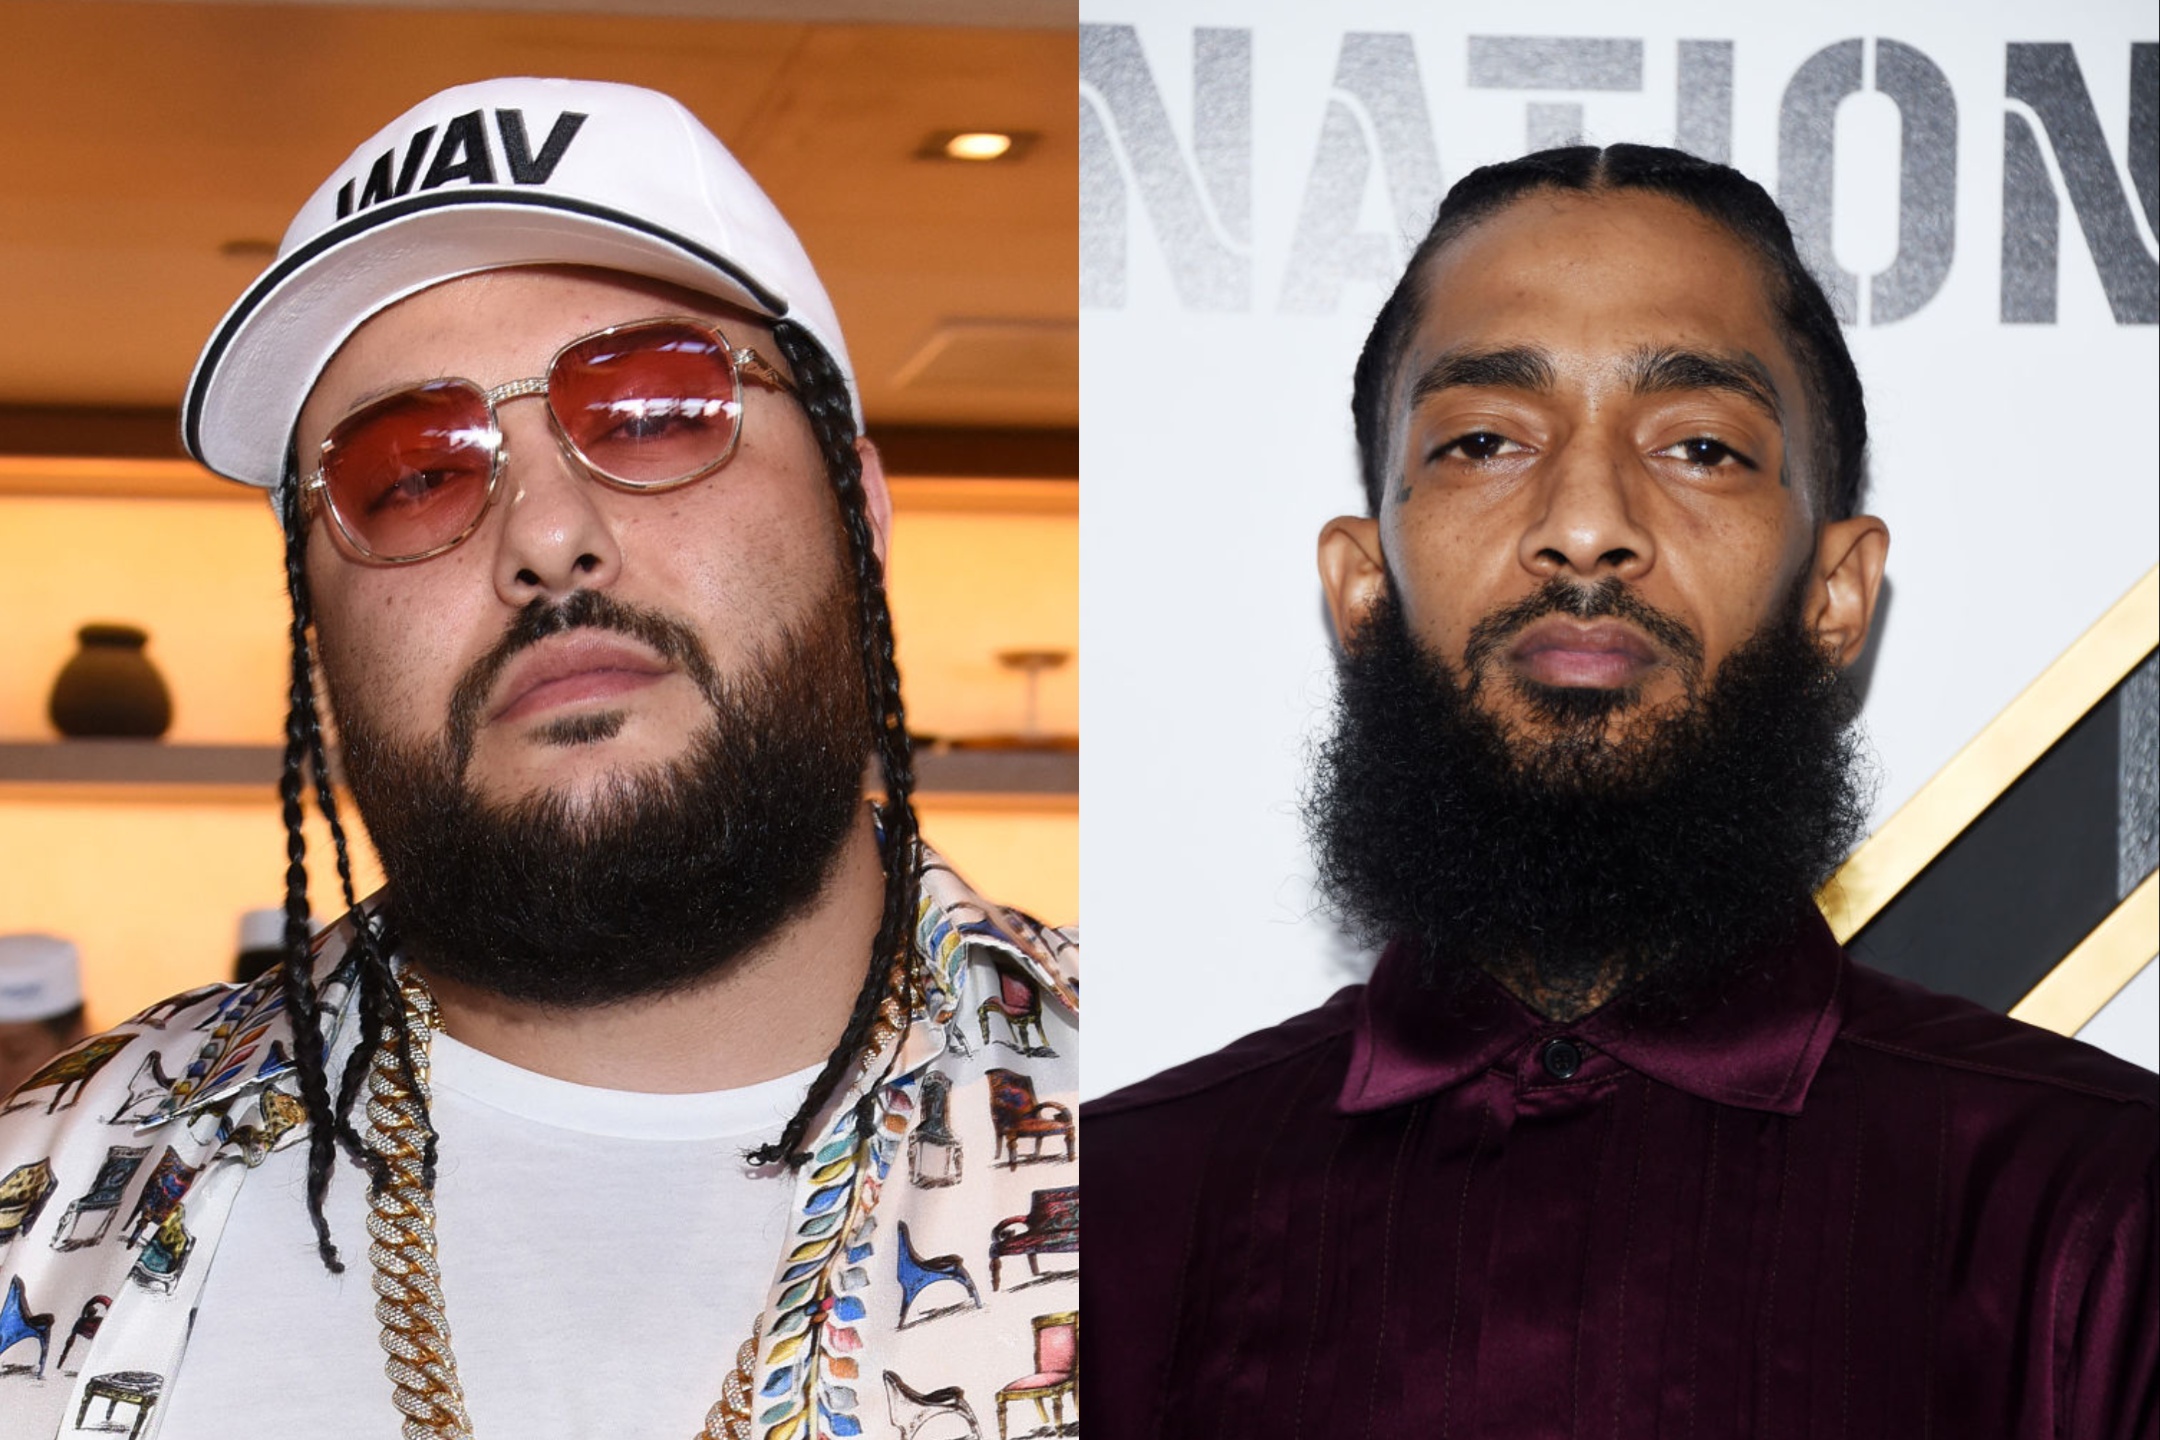 Belly Recorded “Double Up” Verse As A Birthday Gift To Nipsey Hussle